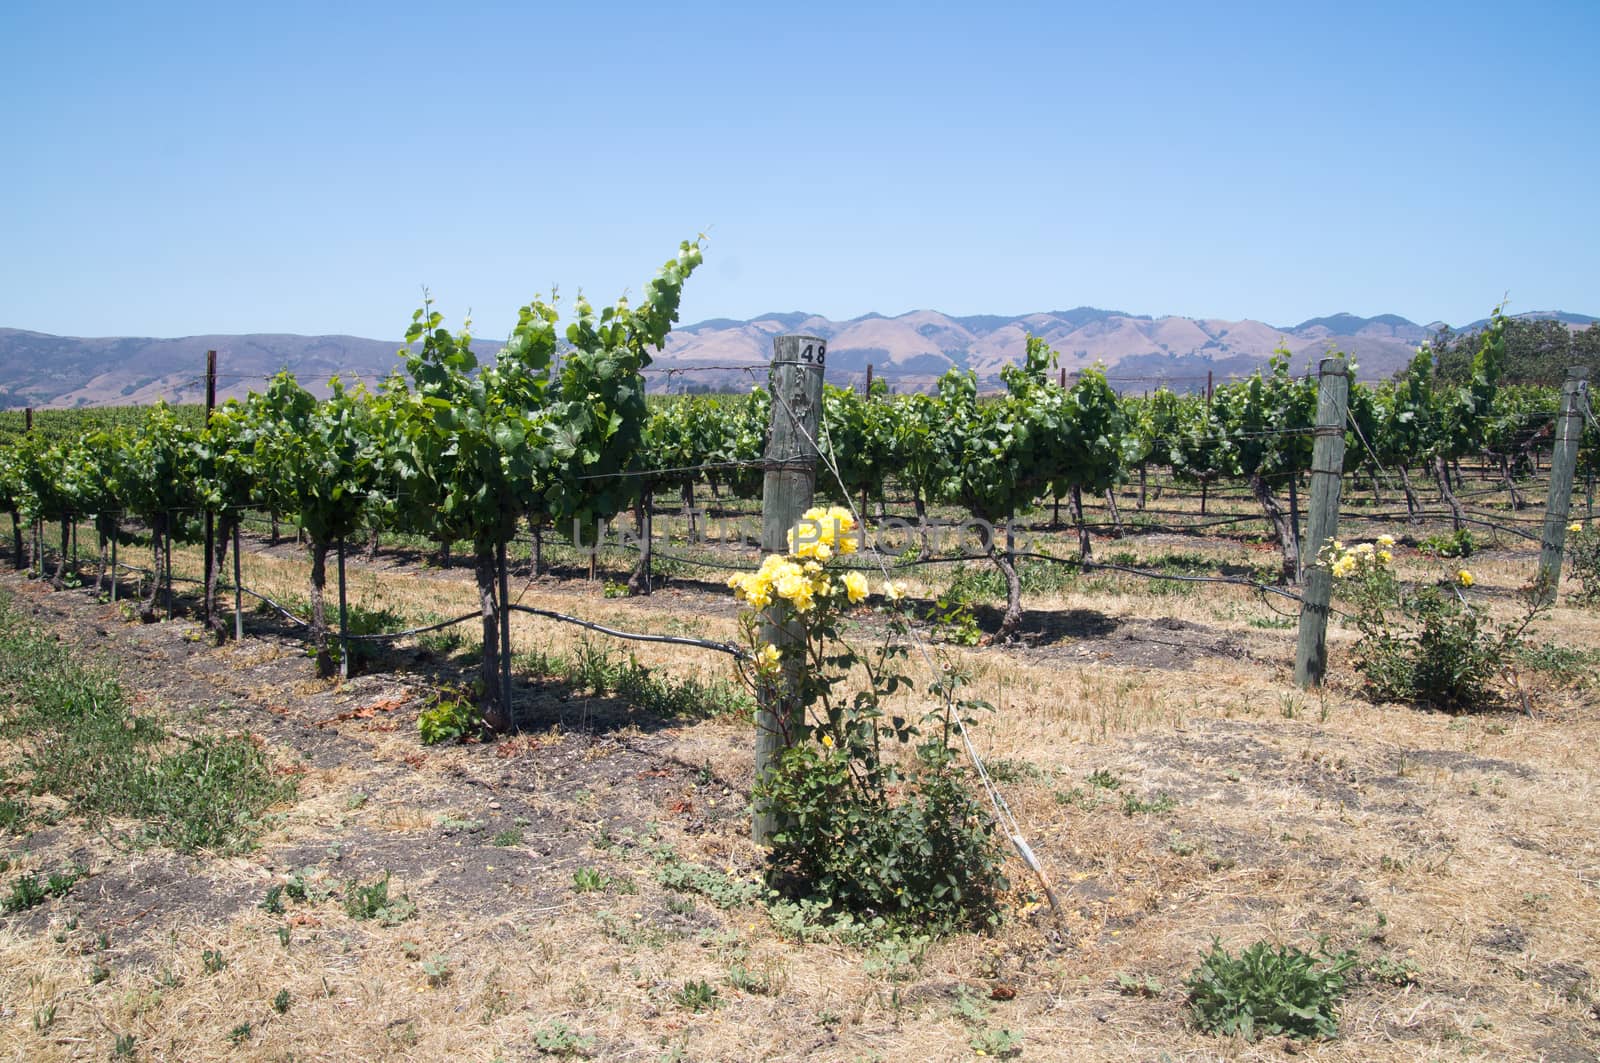 California grapevines and yellow roses